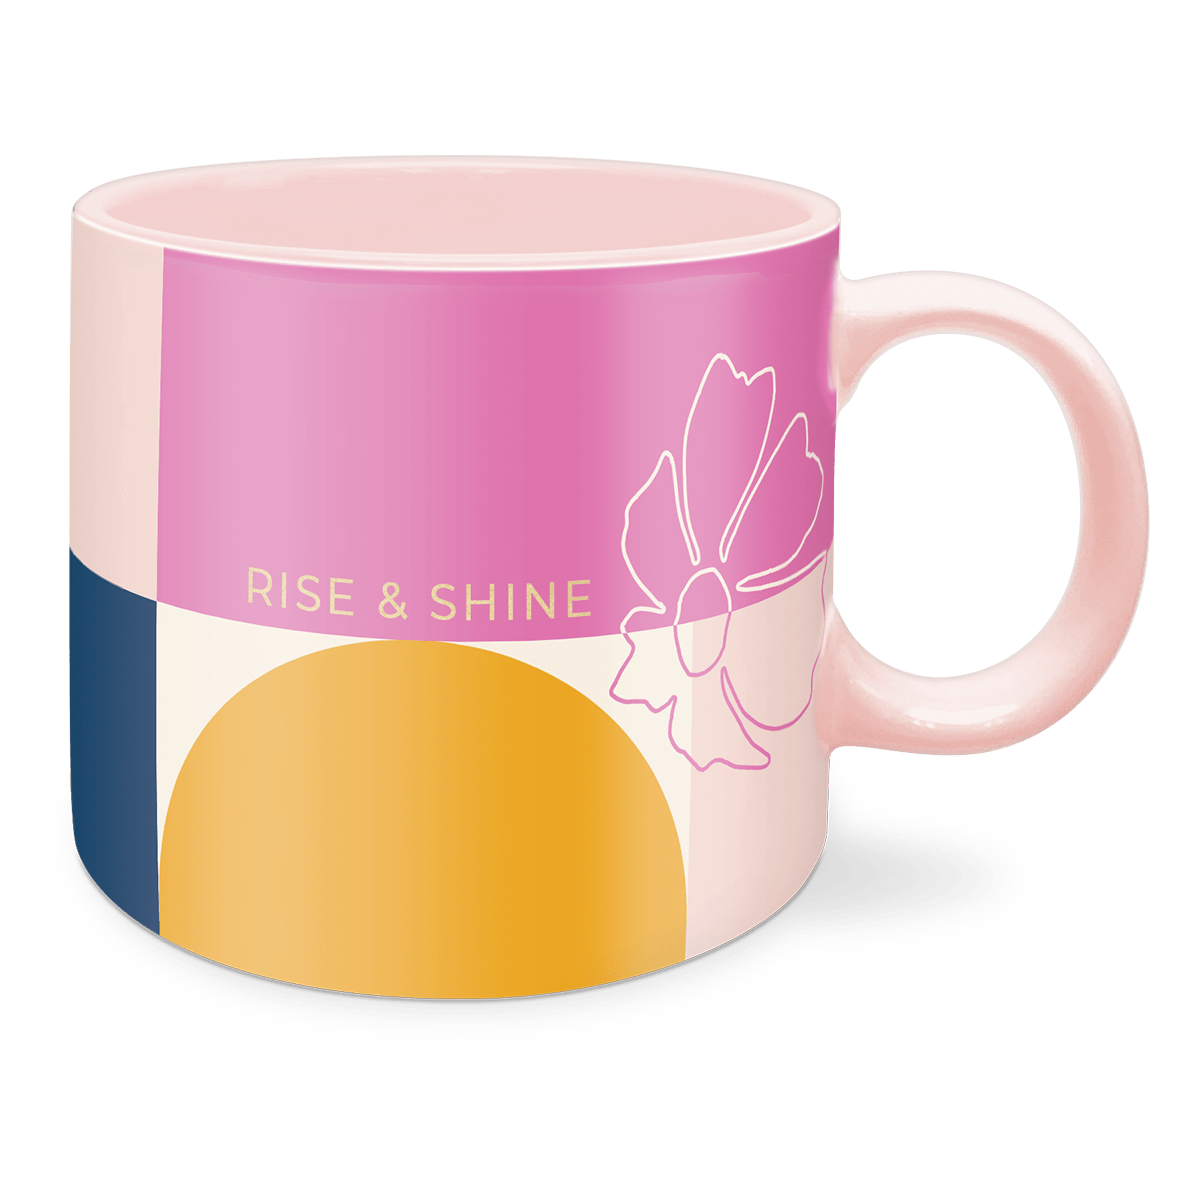 GEO MULTI MUG - A lovely little mug to hold your favorite beverage is always a special way to start (or end) your busy day.